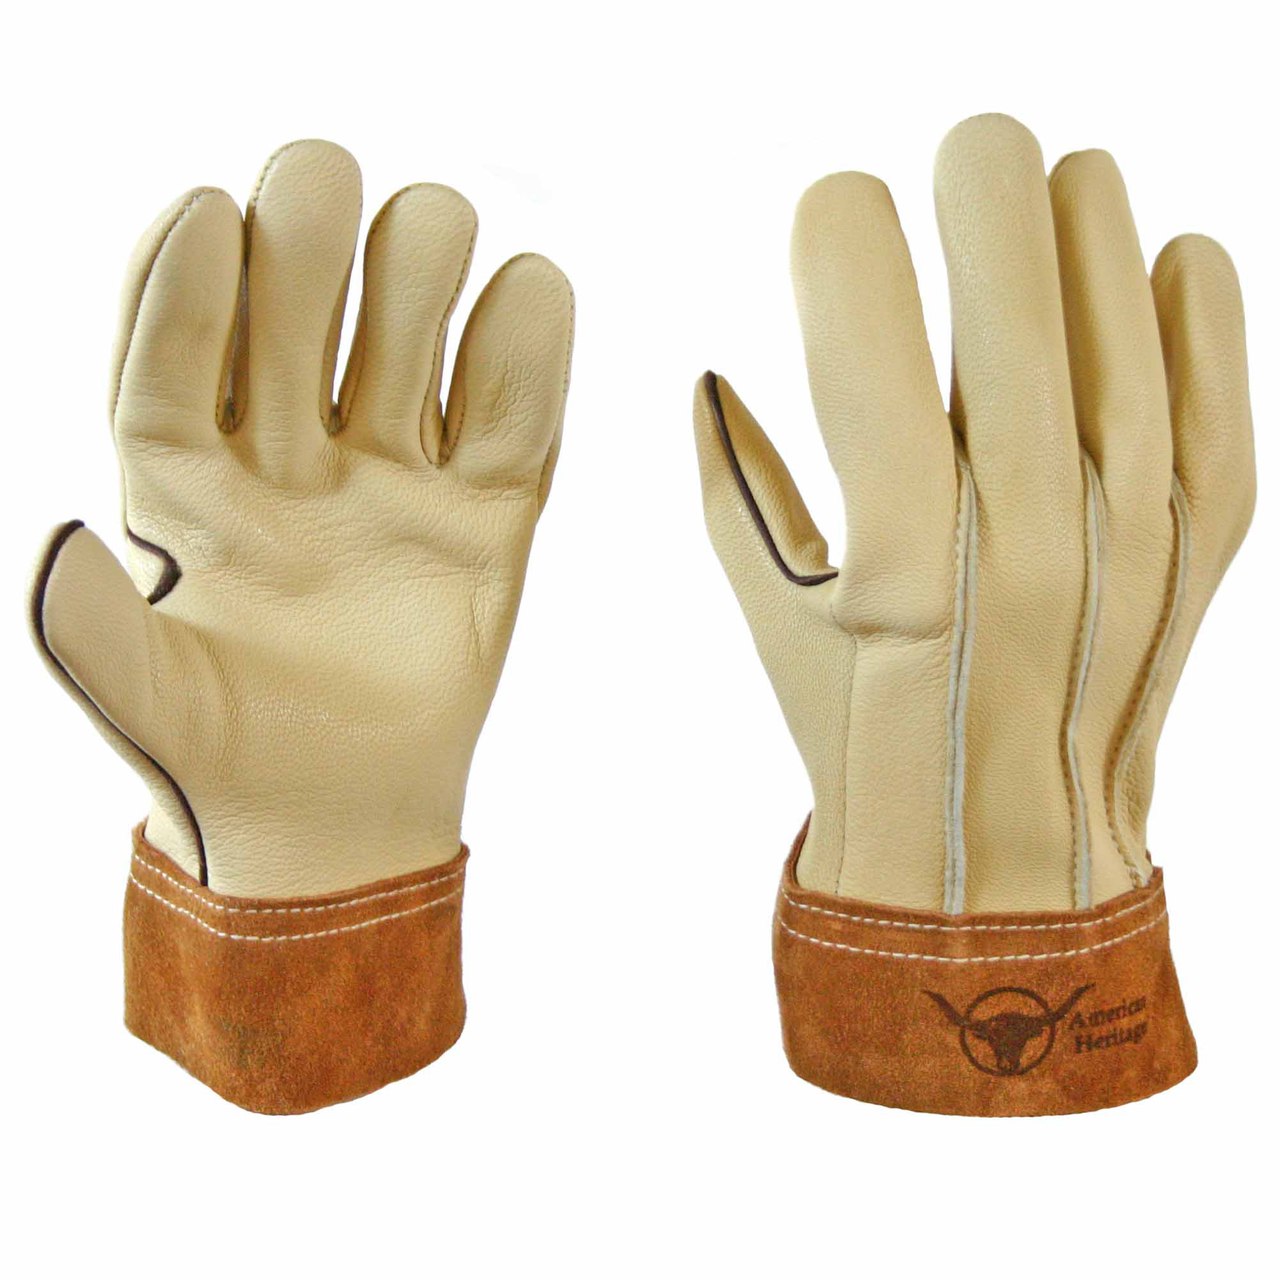 RANCHER by Plainsman 6 Pairs Goatskin Leather Wholesale Work Gloves SMALL 